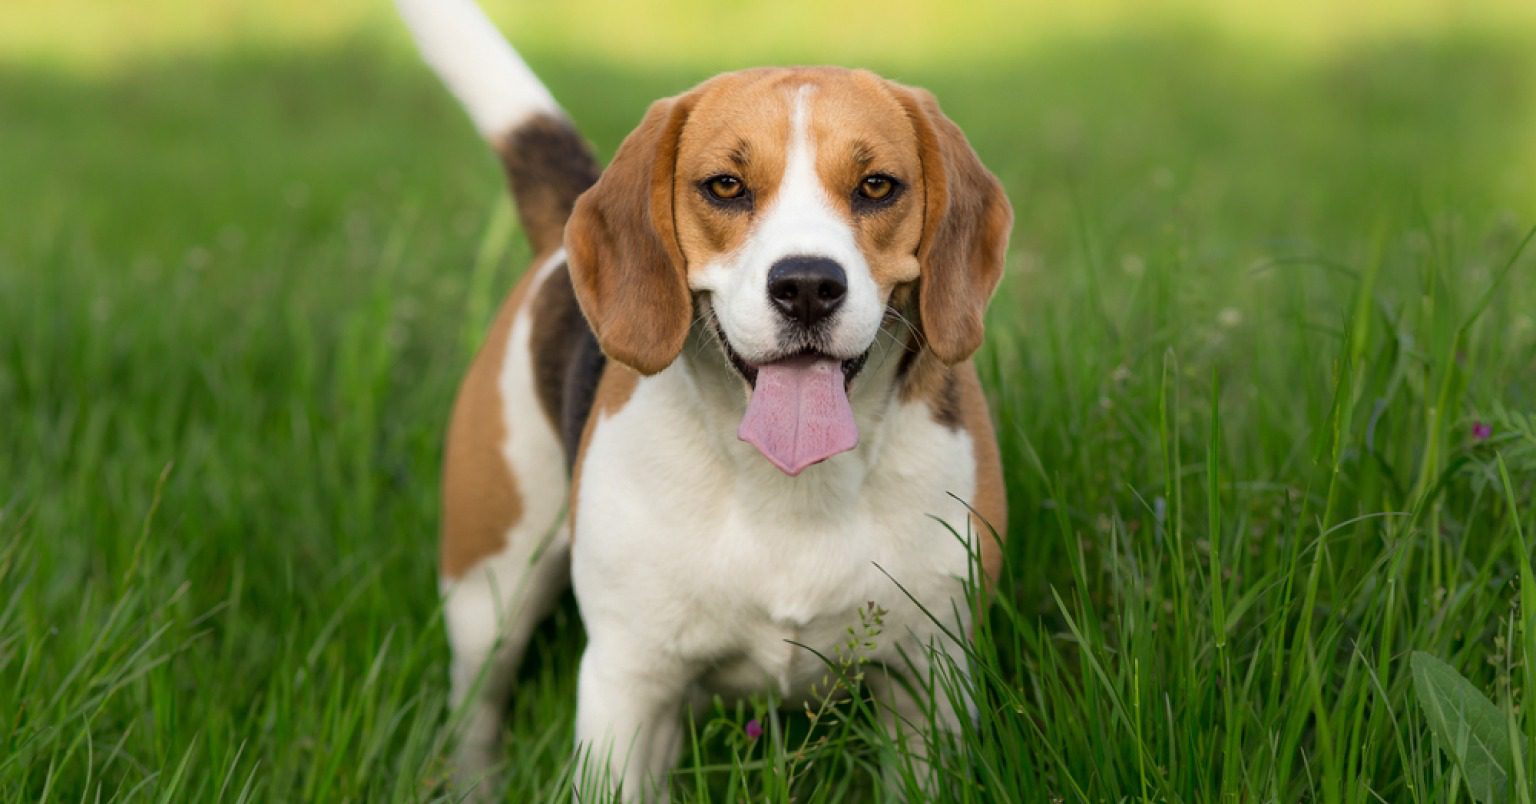 Photograph of a Beagle in green long-bladed grass